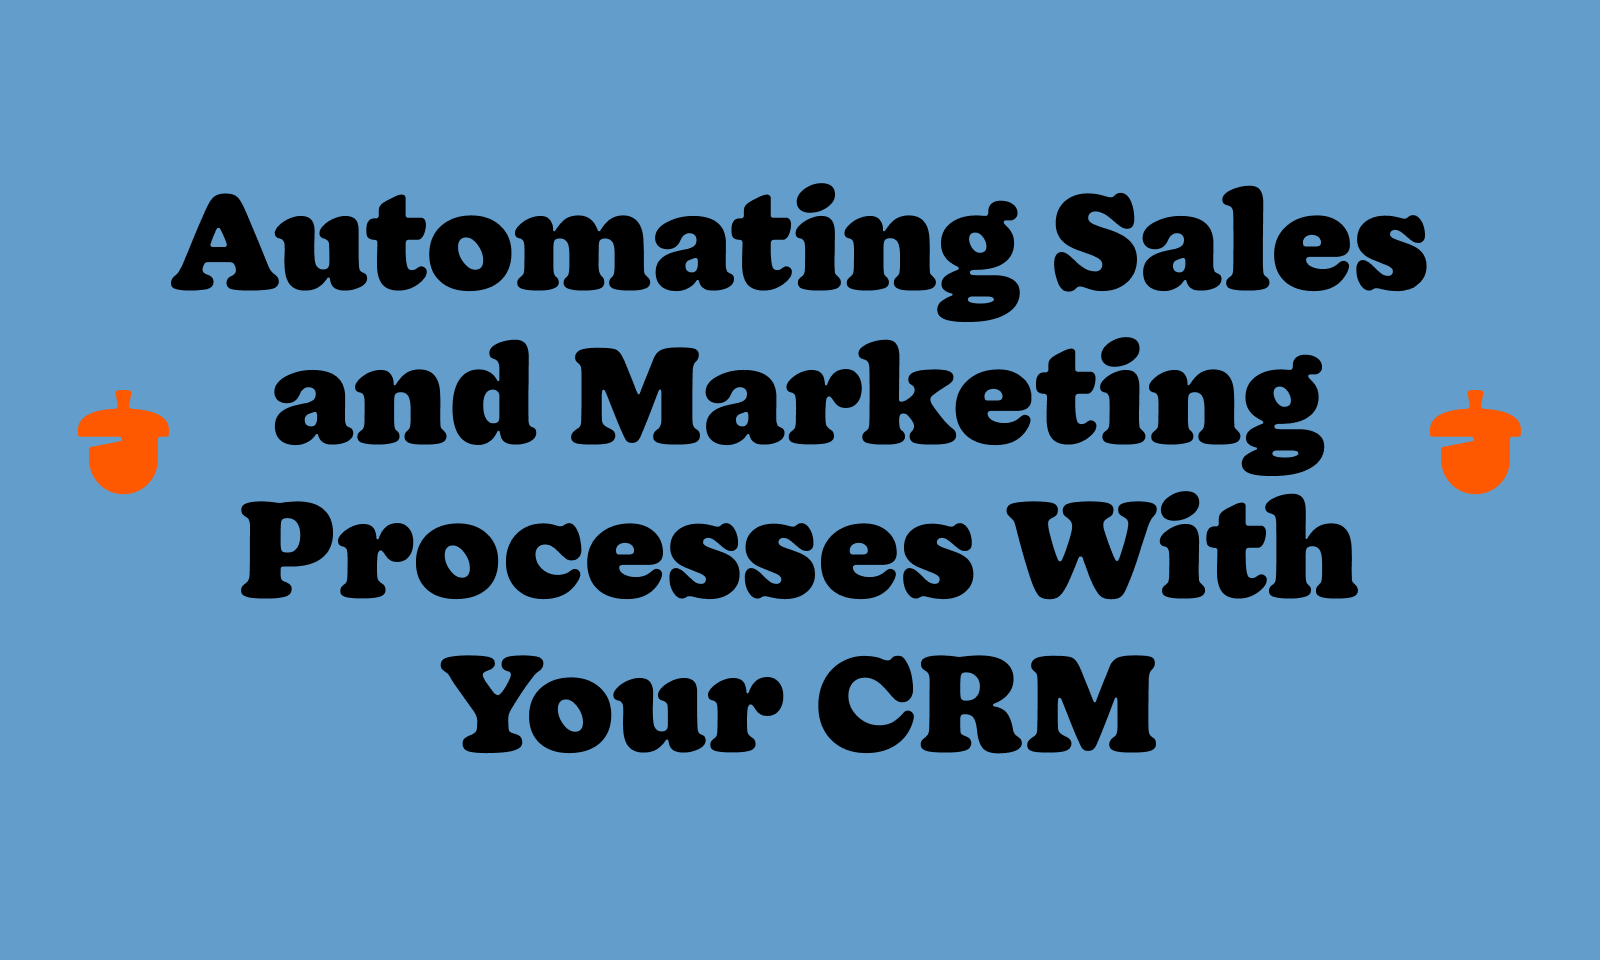 Automating Sales and Marketing Processes With Your CRM